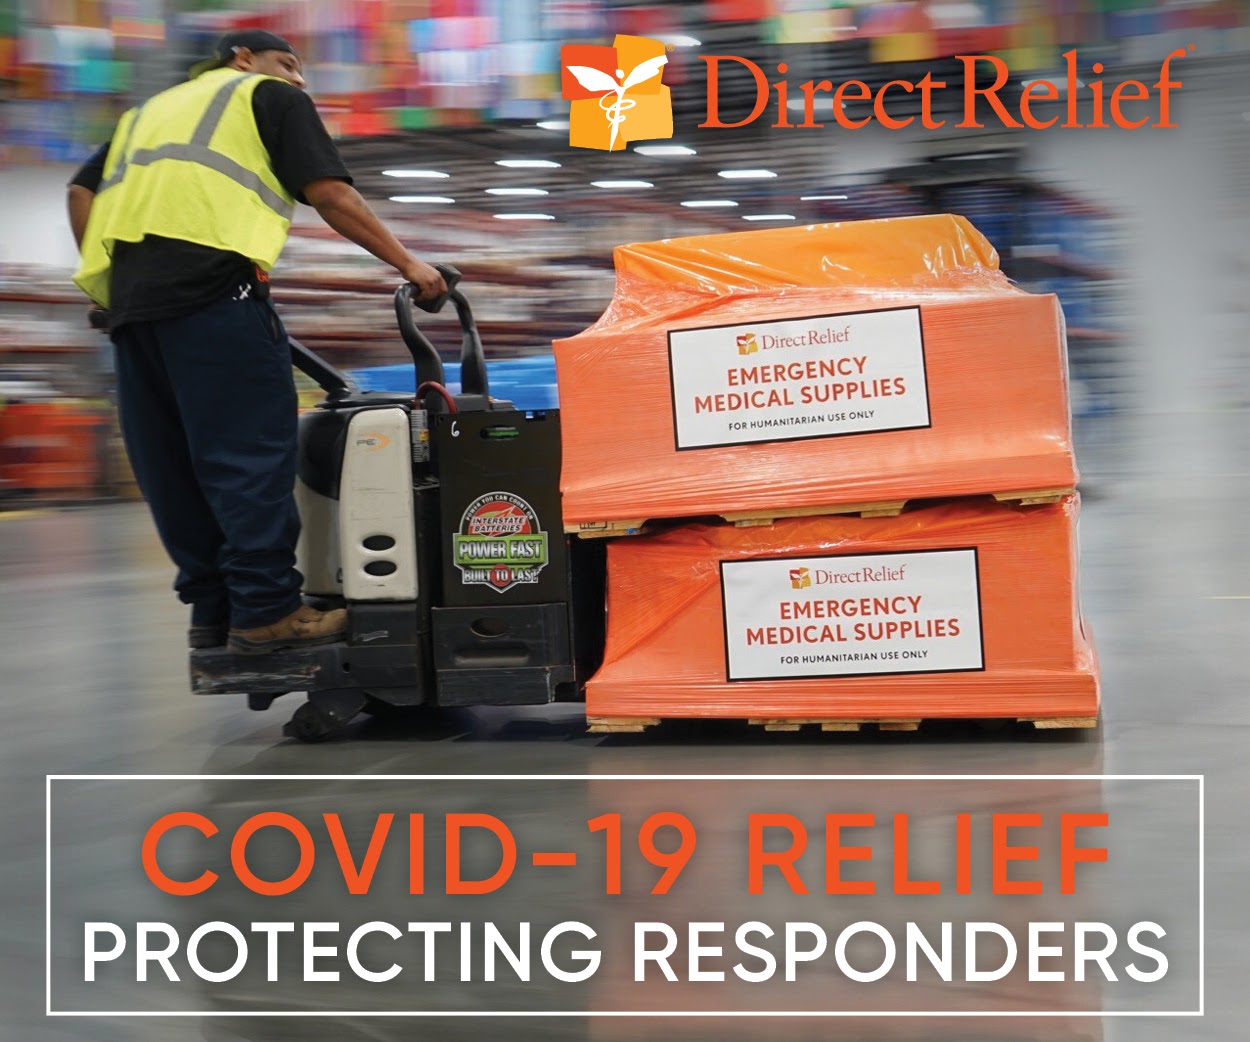 Direct Relief. Covid-19 relief. Protecting responders.